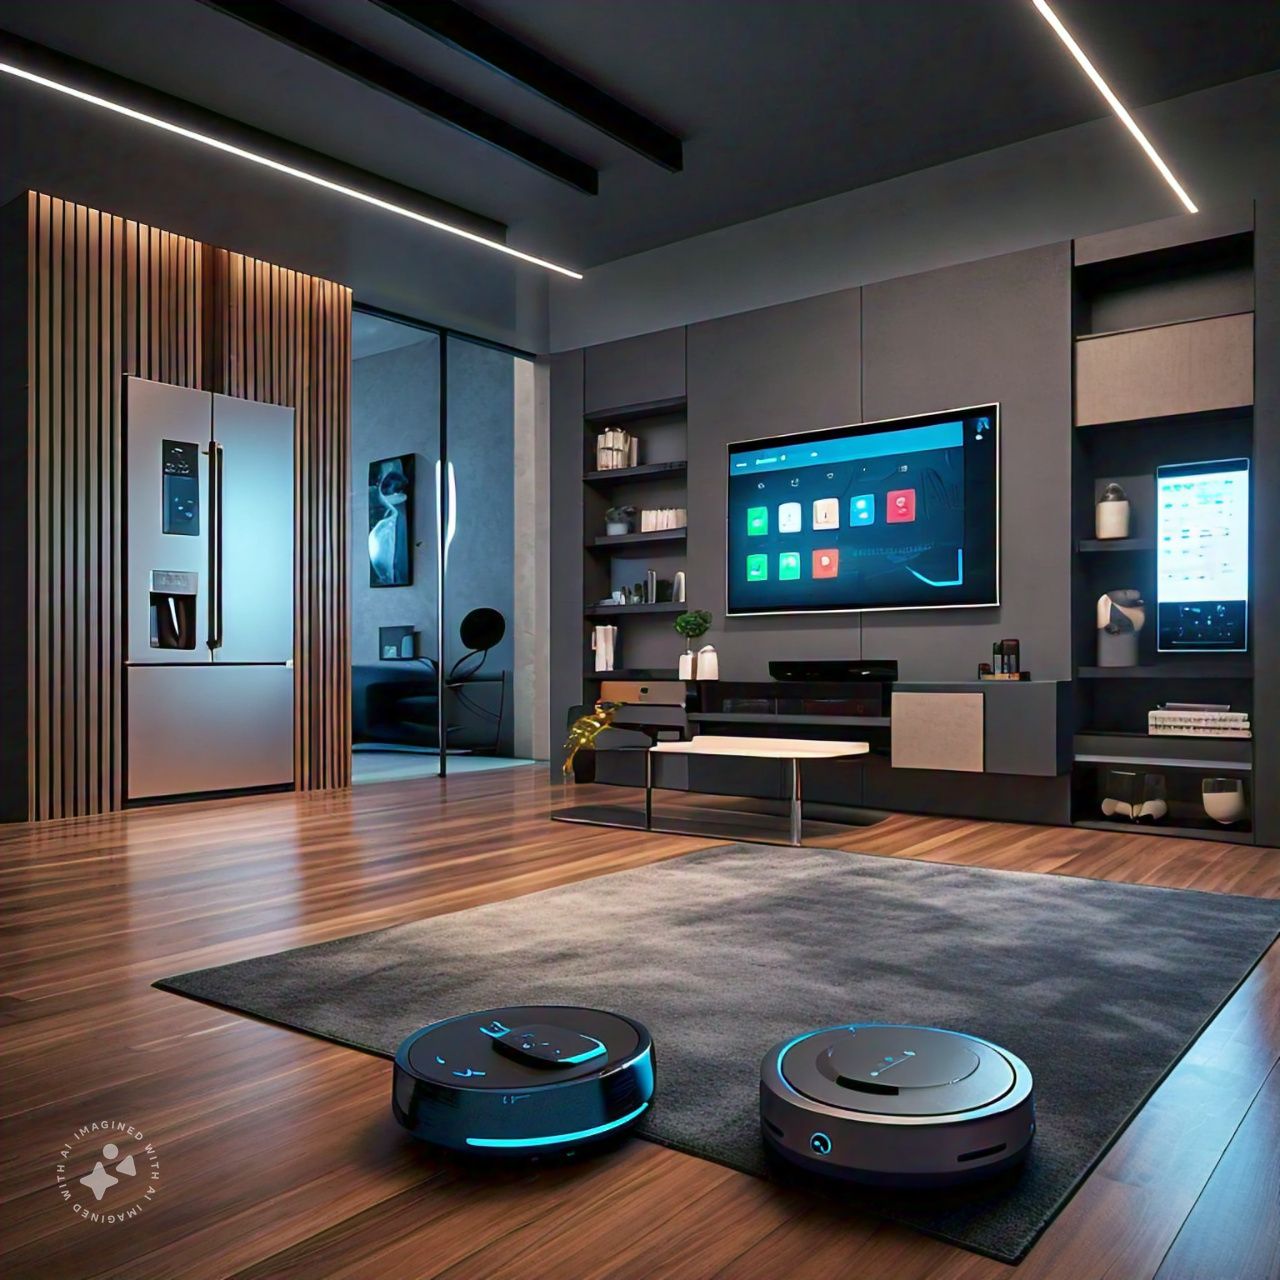 The Role of AI in Smart Home Technologies